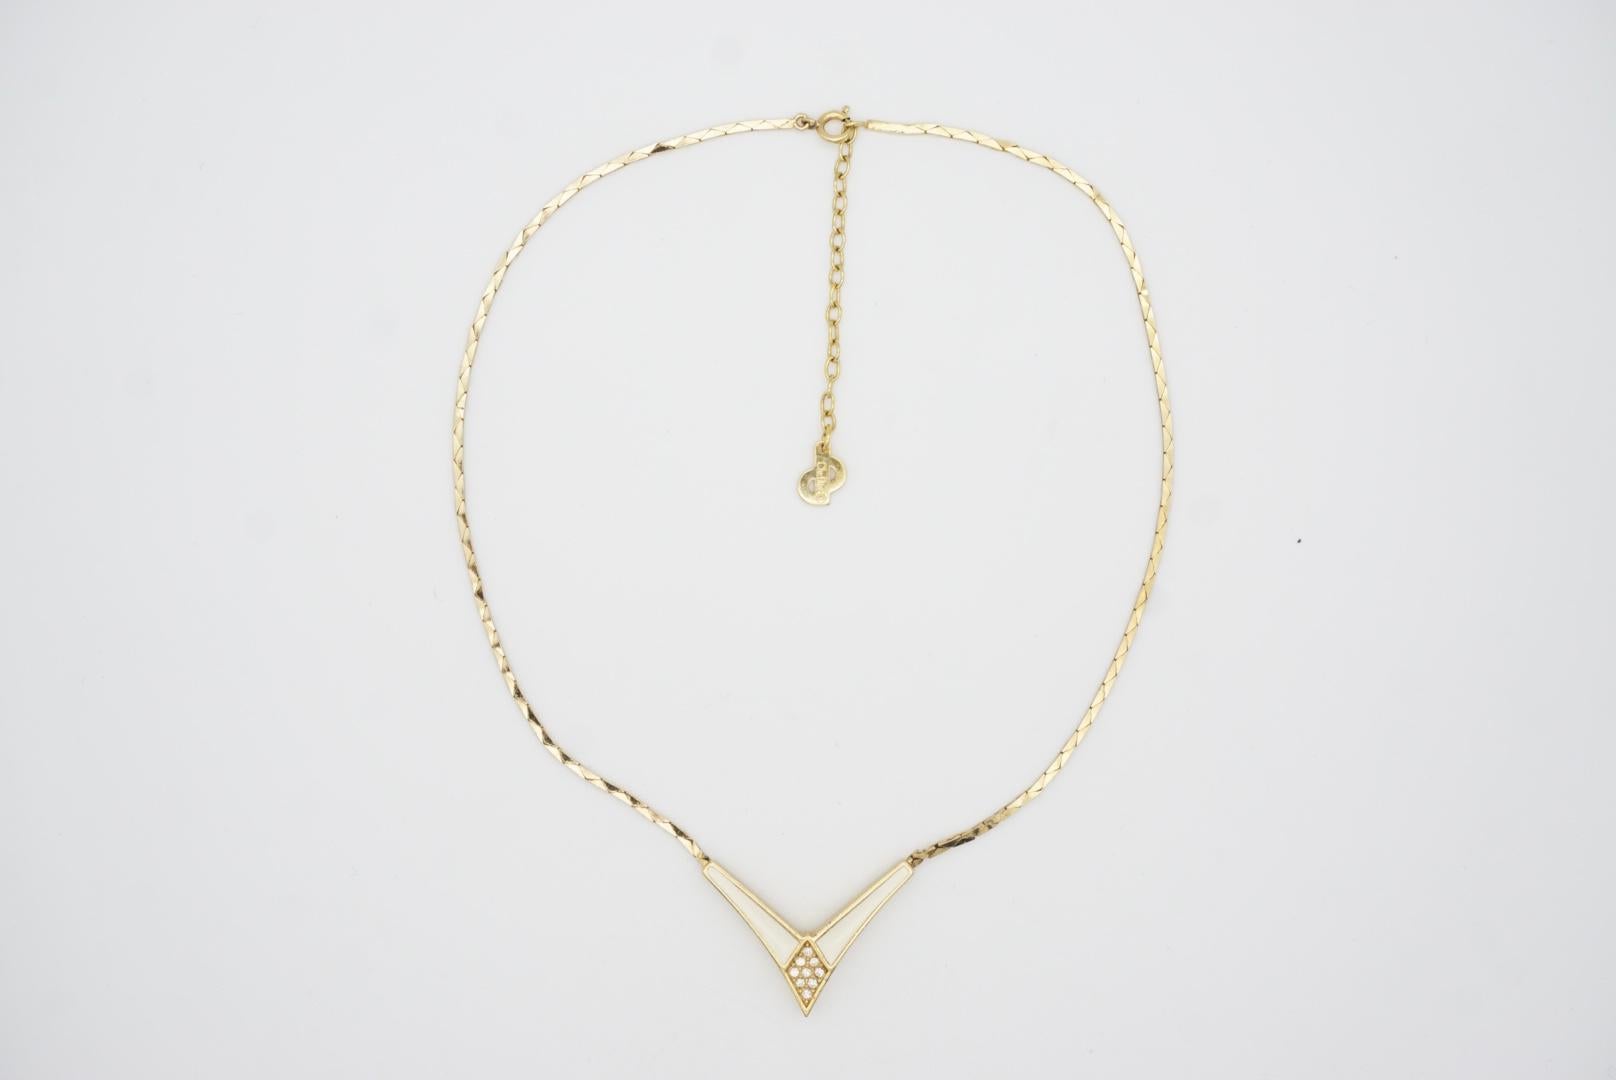 Women's or Men's Christian Dior Vintage 1980s Cream Enamel Triangle Crystals Gold Chain Necklace  For Sale